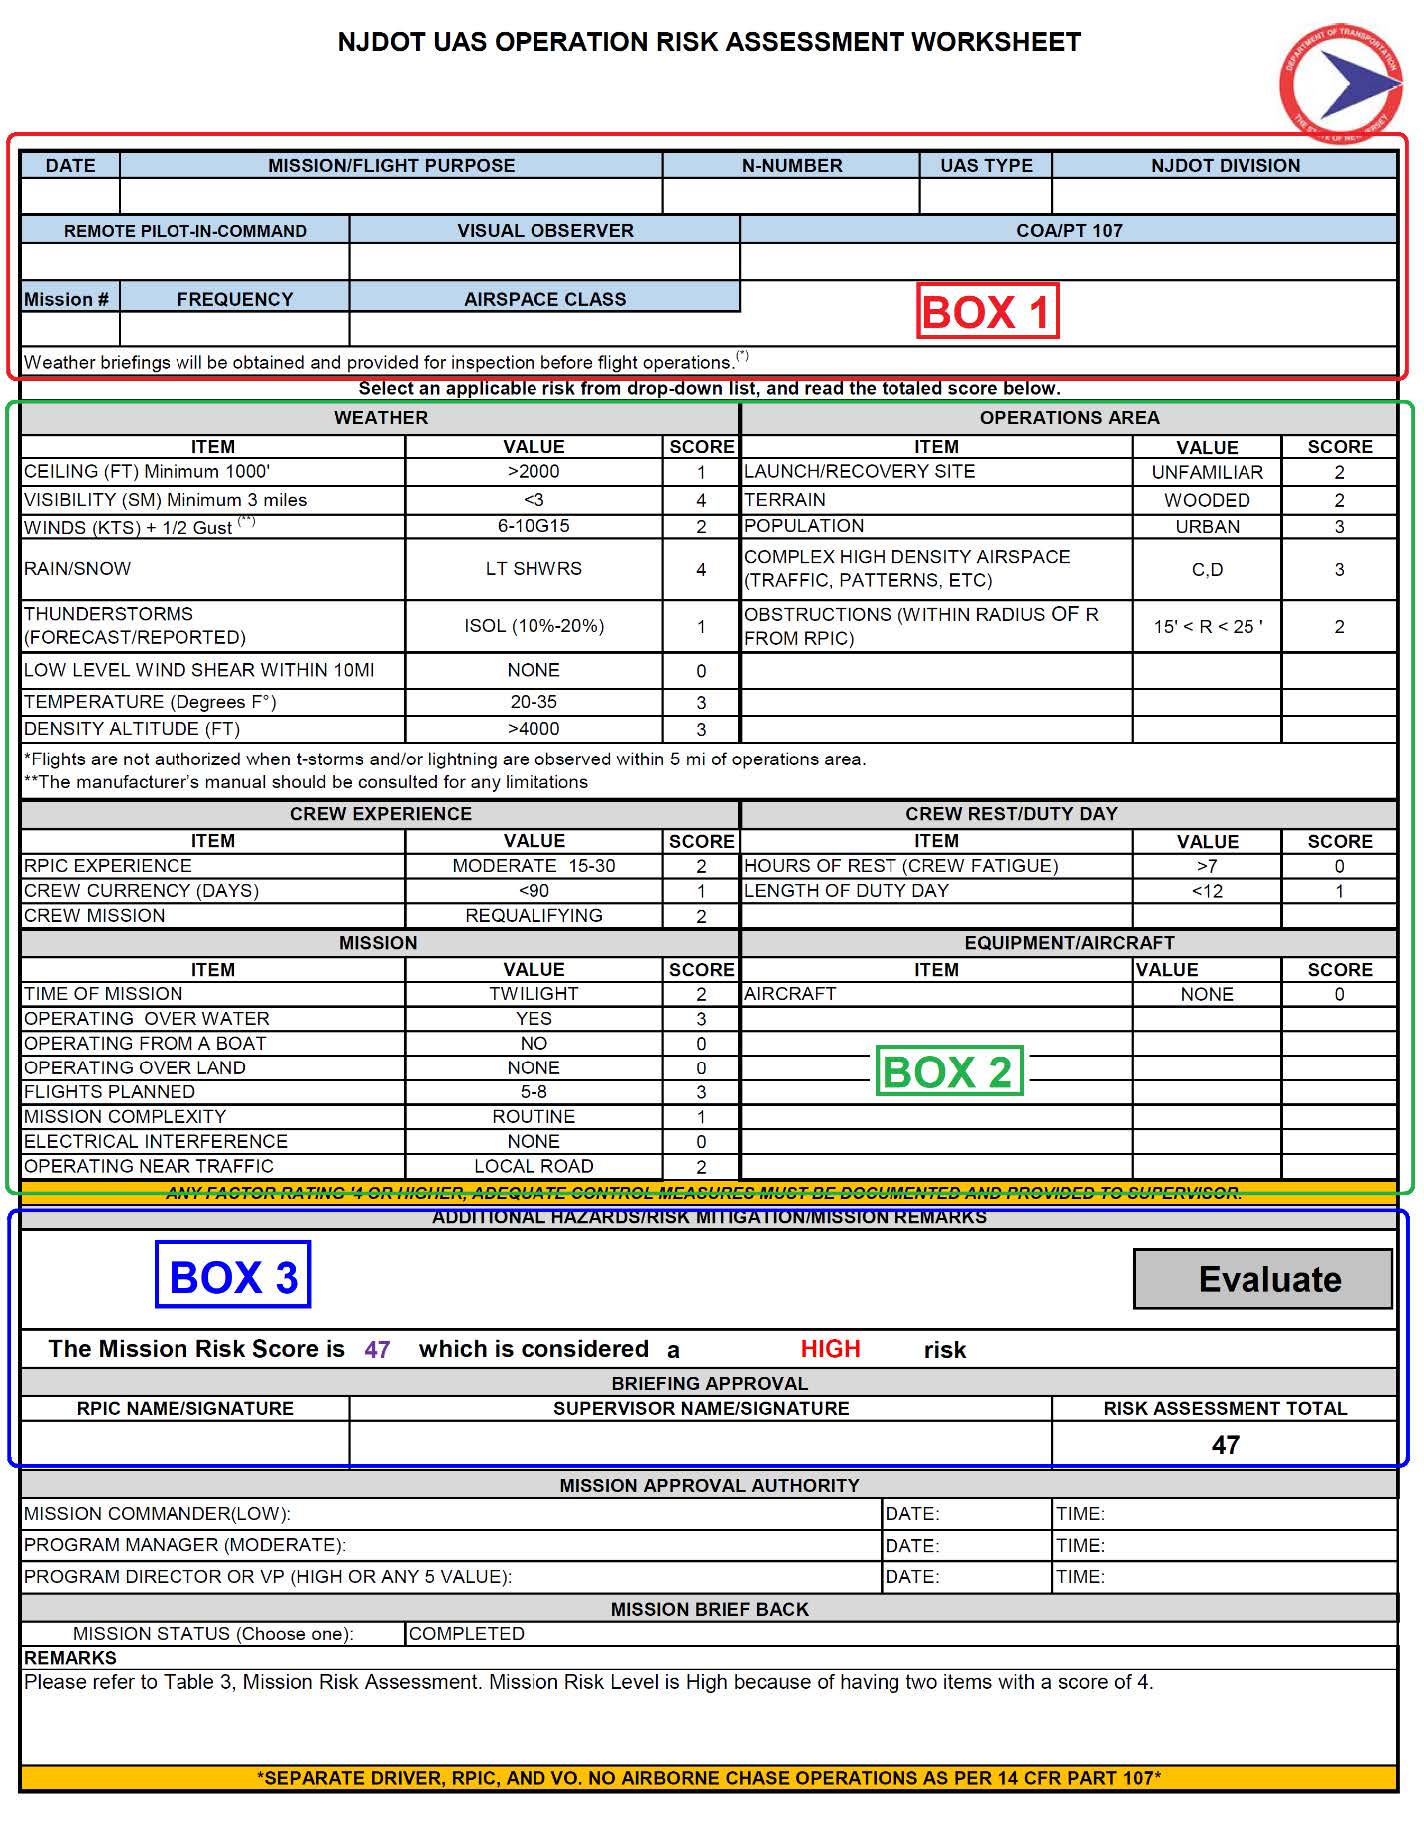 An example Risk Management Worksheet is one of several forms described in the Procedures Manual.